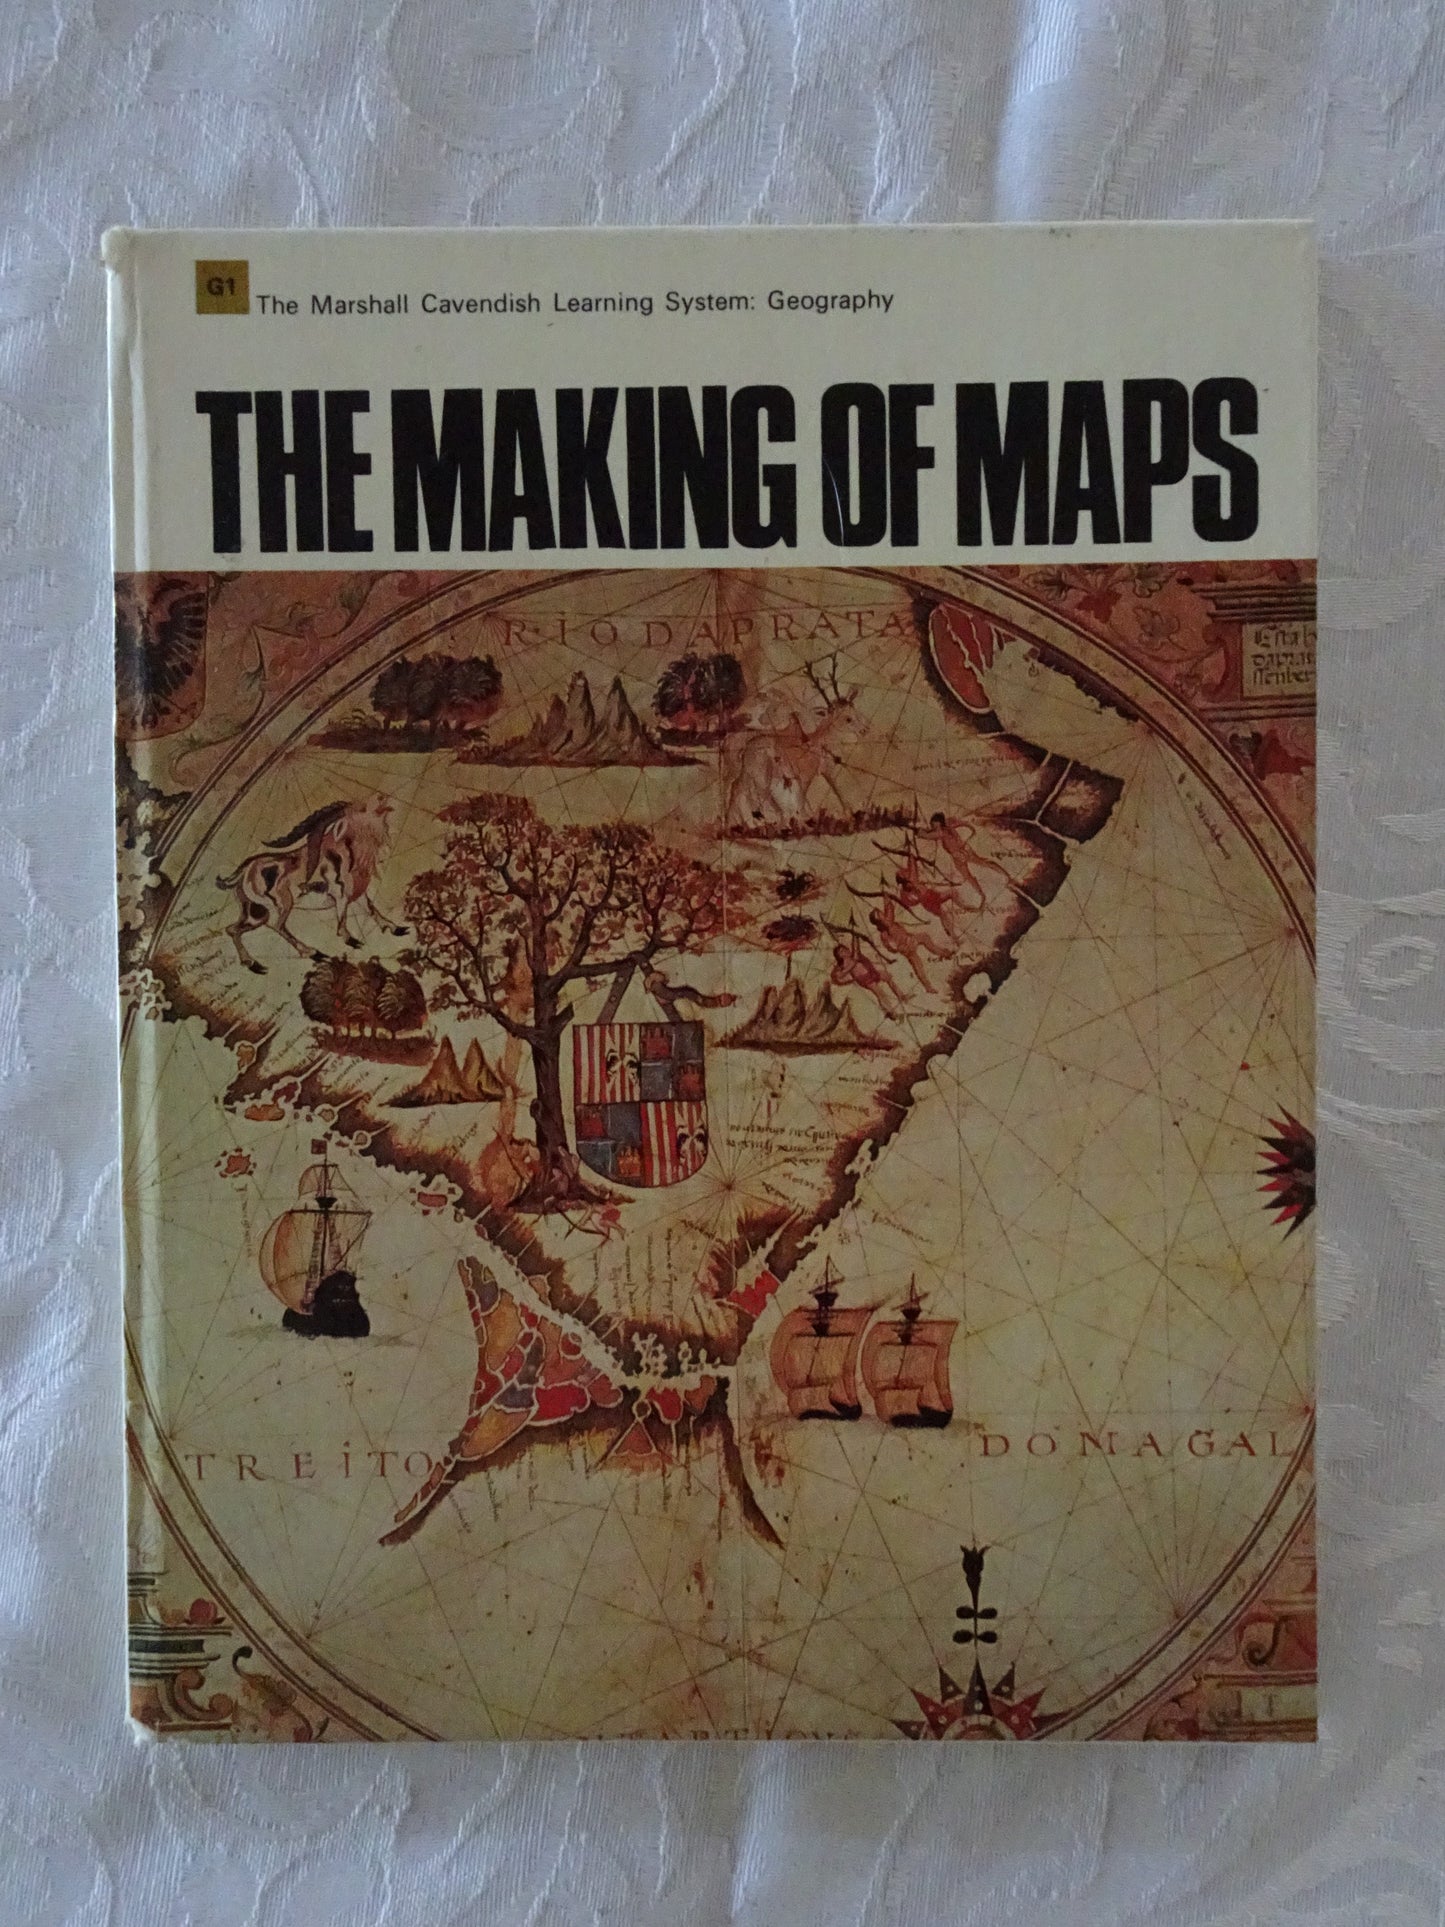 The Making of Maps by The Marshall Cavendish Learning System